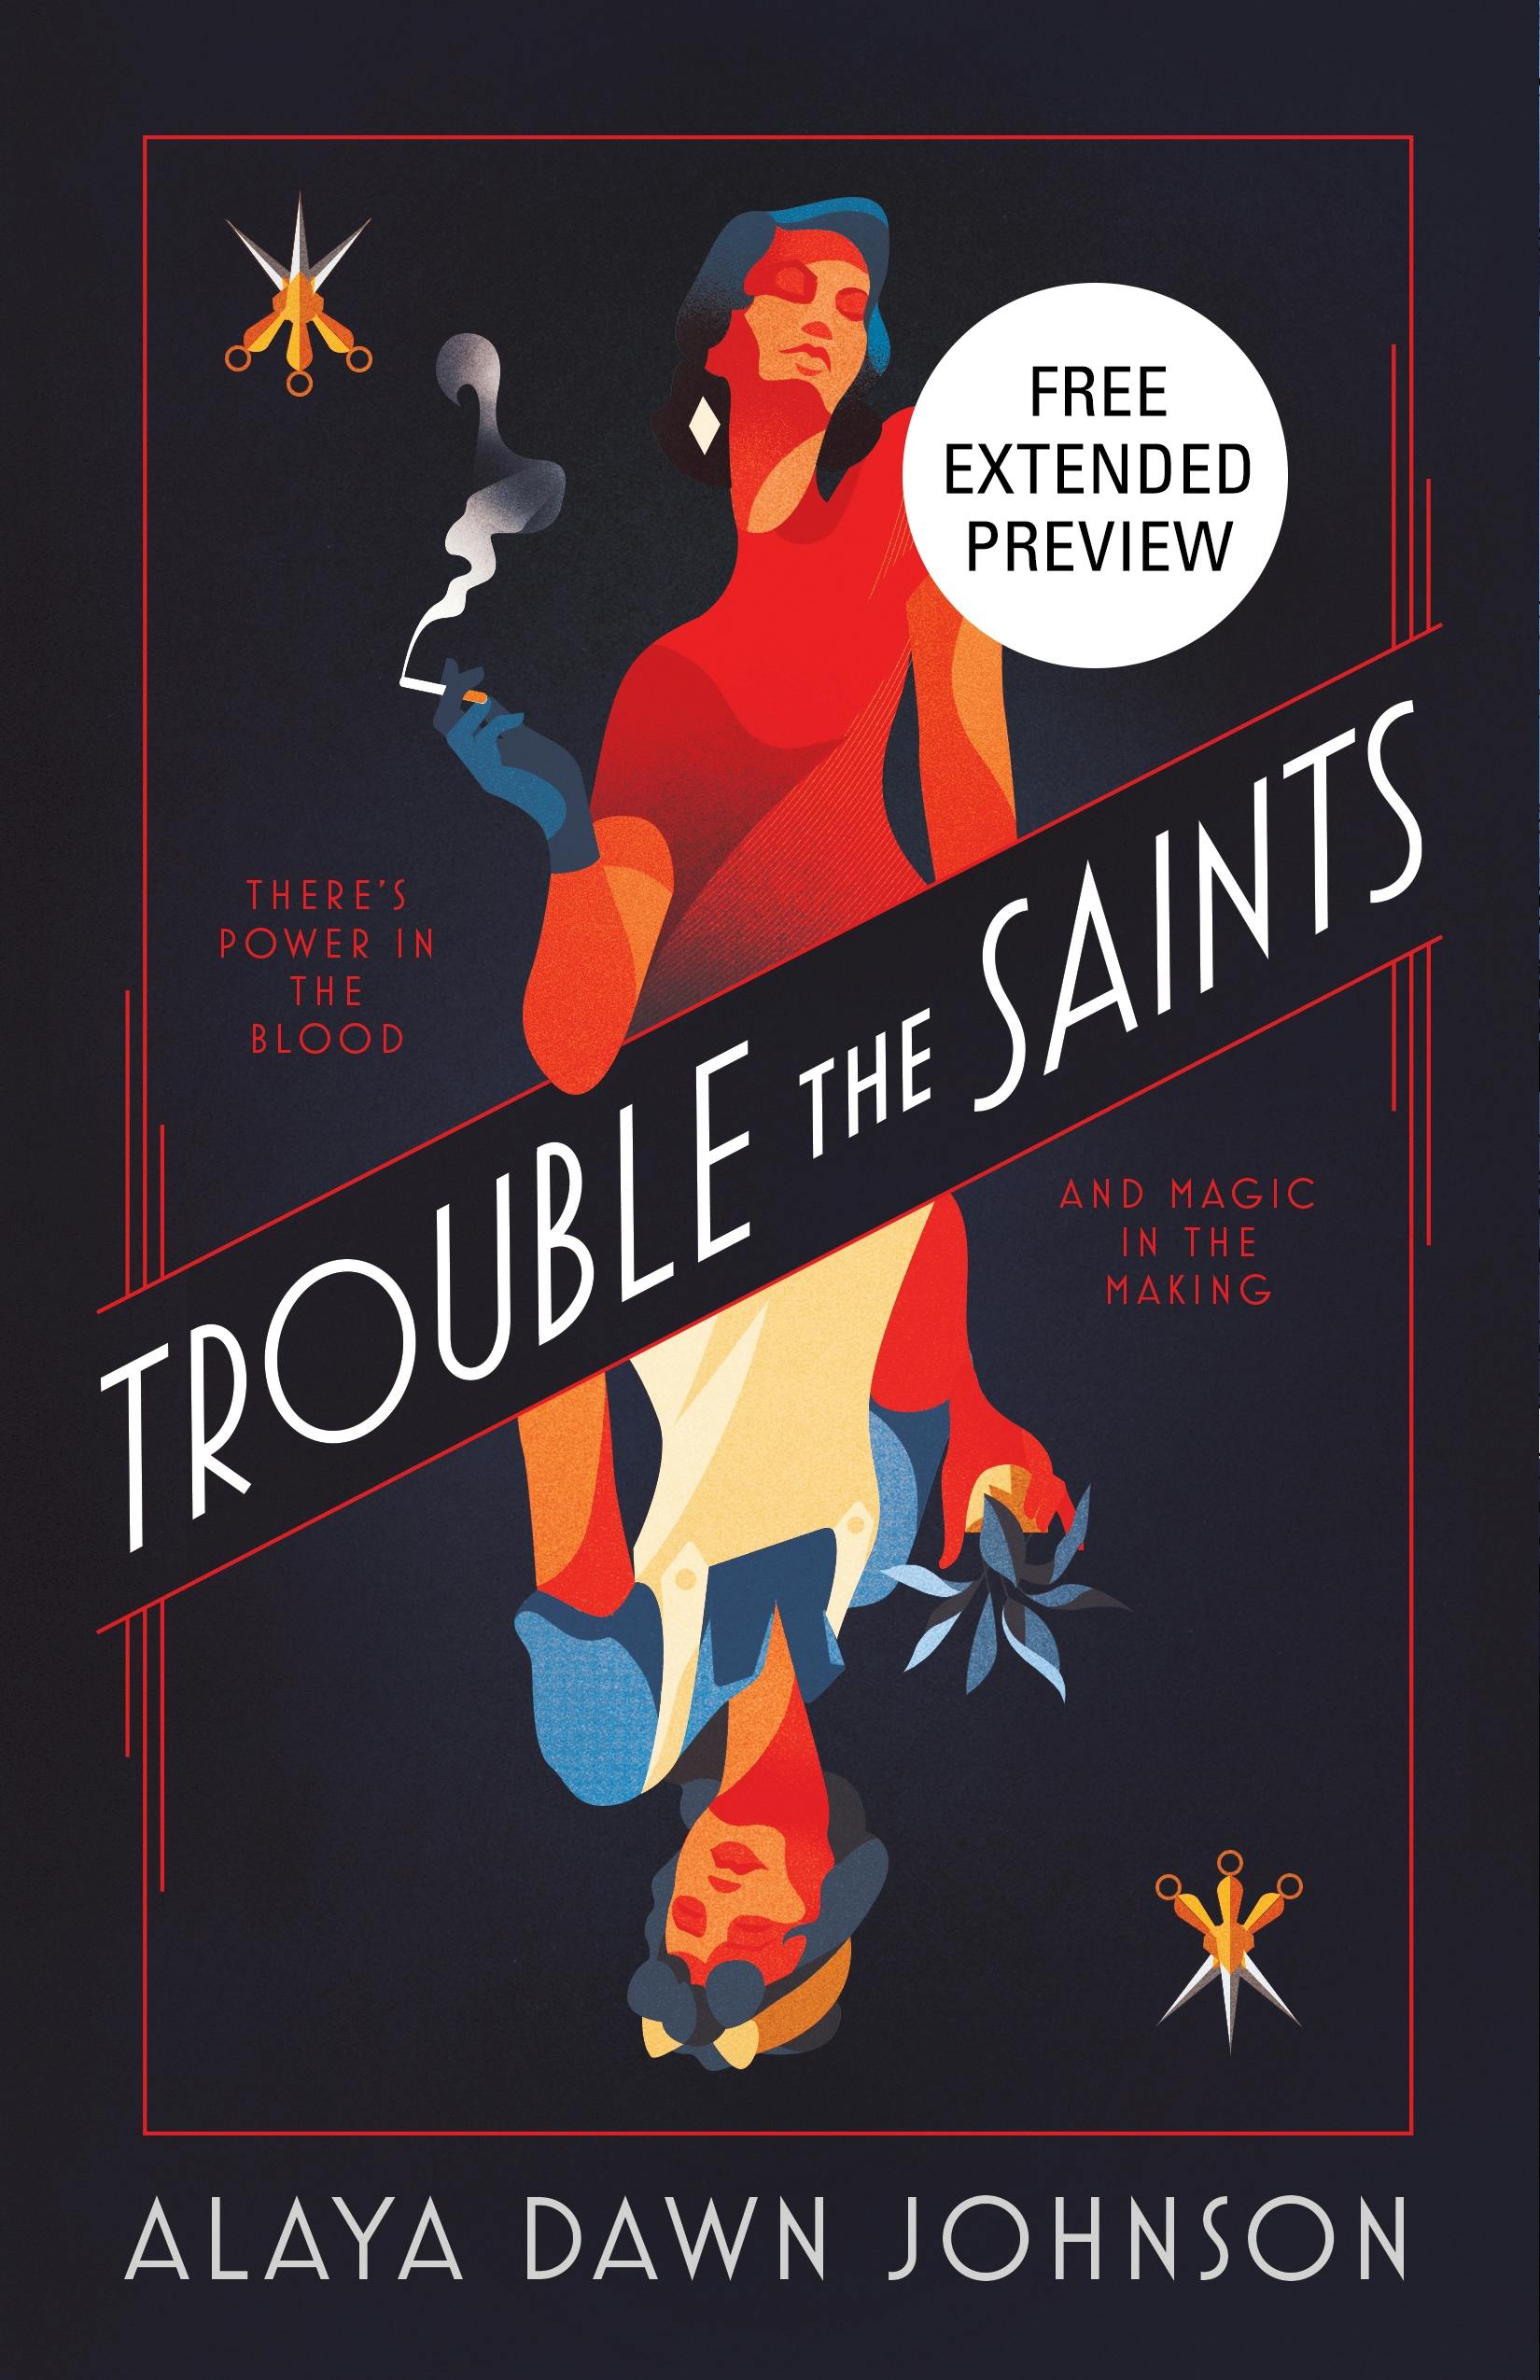 Cover for the book titled as: Trouble the Saints Sneak Peek